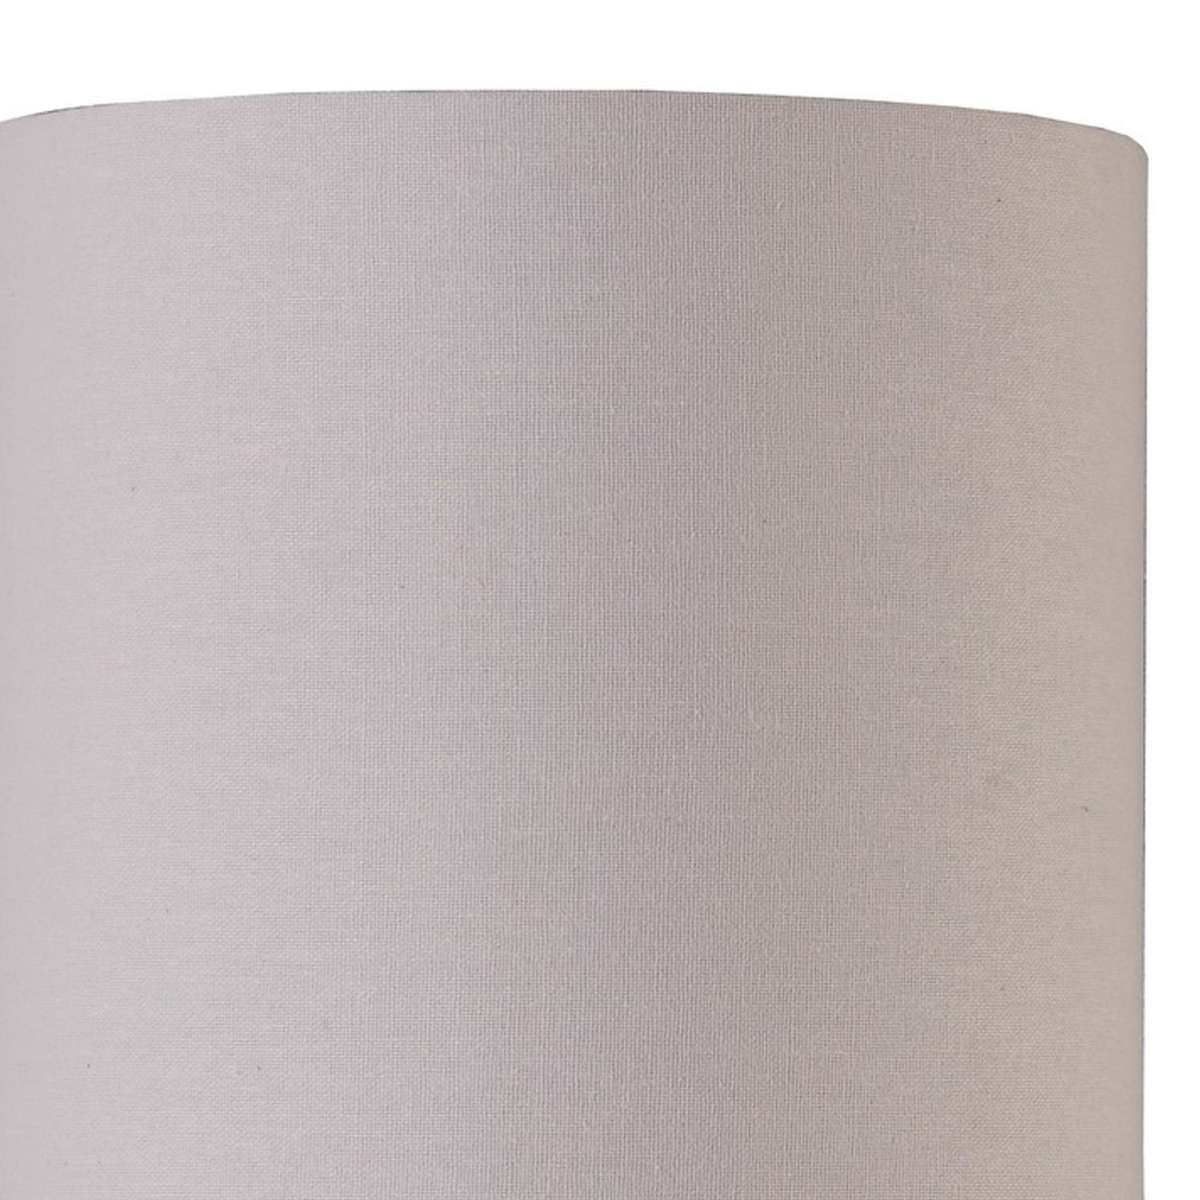 Benzara Table Lamp With Curved Abstract Metal Base, Silver By Benzara Table Lamps BM240346